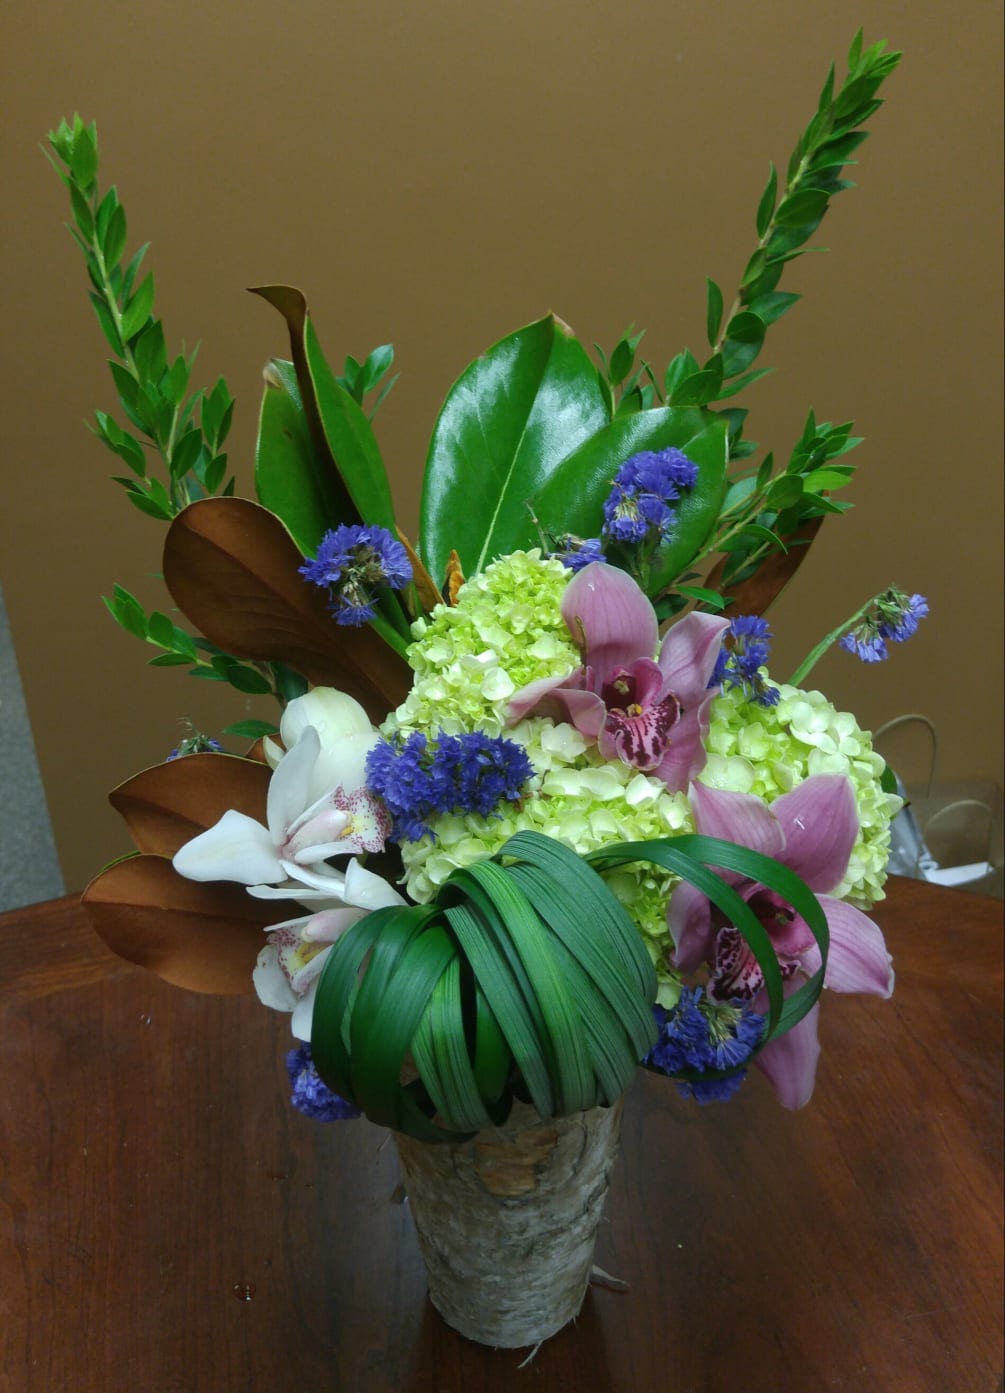 mixed flowers and greens with a birch vase